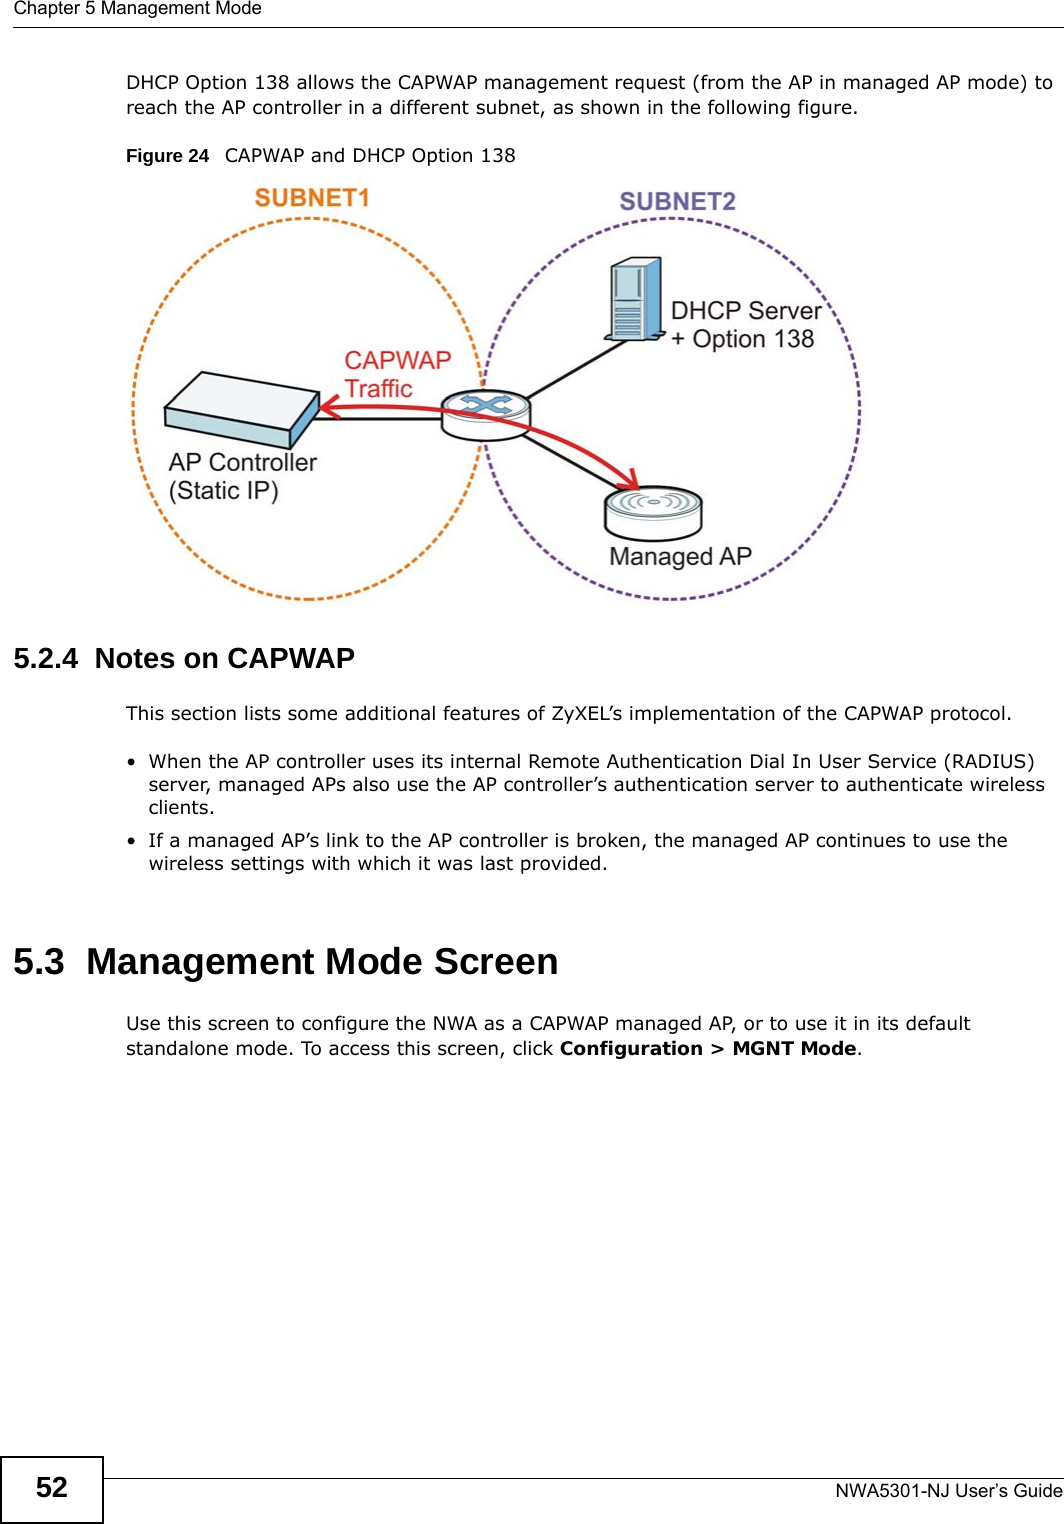 Chapter 5 Management ModeNWA5301-NJ User’s Guide52DHCP Option 138 allows the CAPWAP management request (from the AP in managed AP mode) to reach the AP controller in a different subnet, as shown in the following figure.Figure 24   CAPWAP and DHCP Option 138 5.2.4  Notes on CAPWAPThis section lists some additional features of ZyXEL’s implementation of the CAPWAP protocol.• When the AP controller uses its internal Remote Authentication Dial In User Service (RADIUS) server, managed APs also use the AP controller’s authentication server to authenticate wireless clients.• If a managed AP’s link to the AP controller is broken, the managed AP continues to use the wireless settings with which it was last provided.5.3  Management Mode ScreenUse this screen to configure the NWA as a CAPWAP managed AP, or to use it in its default standalone mode. To access this screen, click Configuration &gt; MGNT Mode.